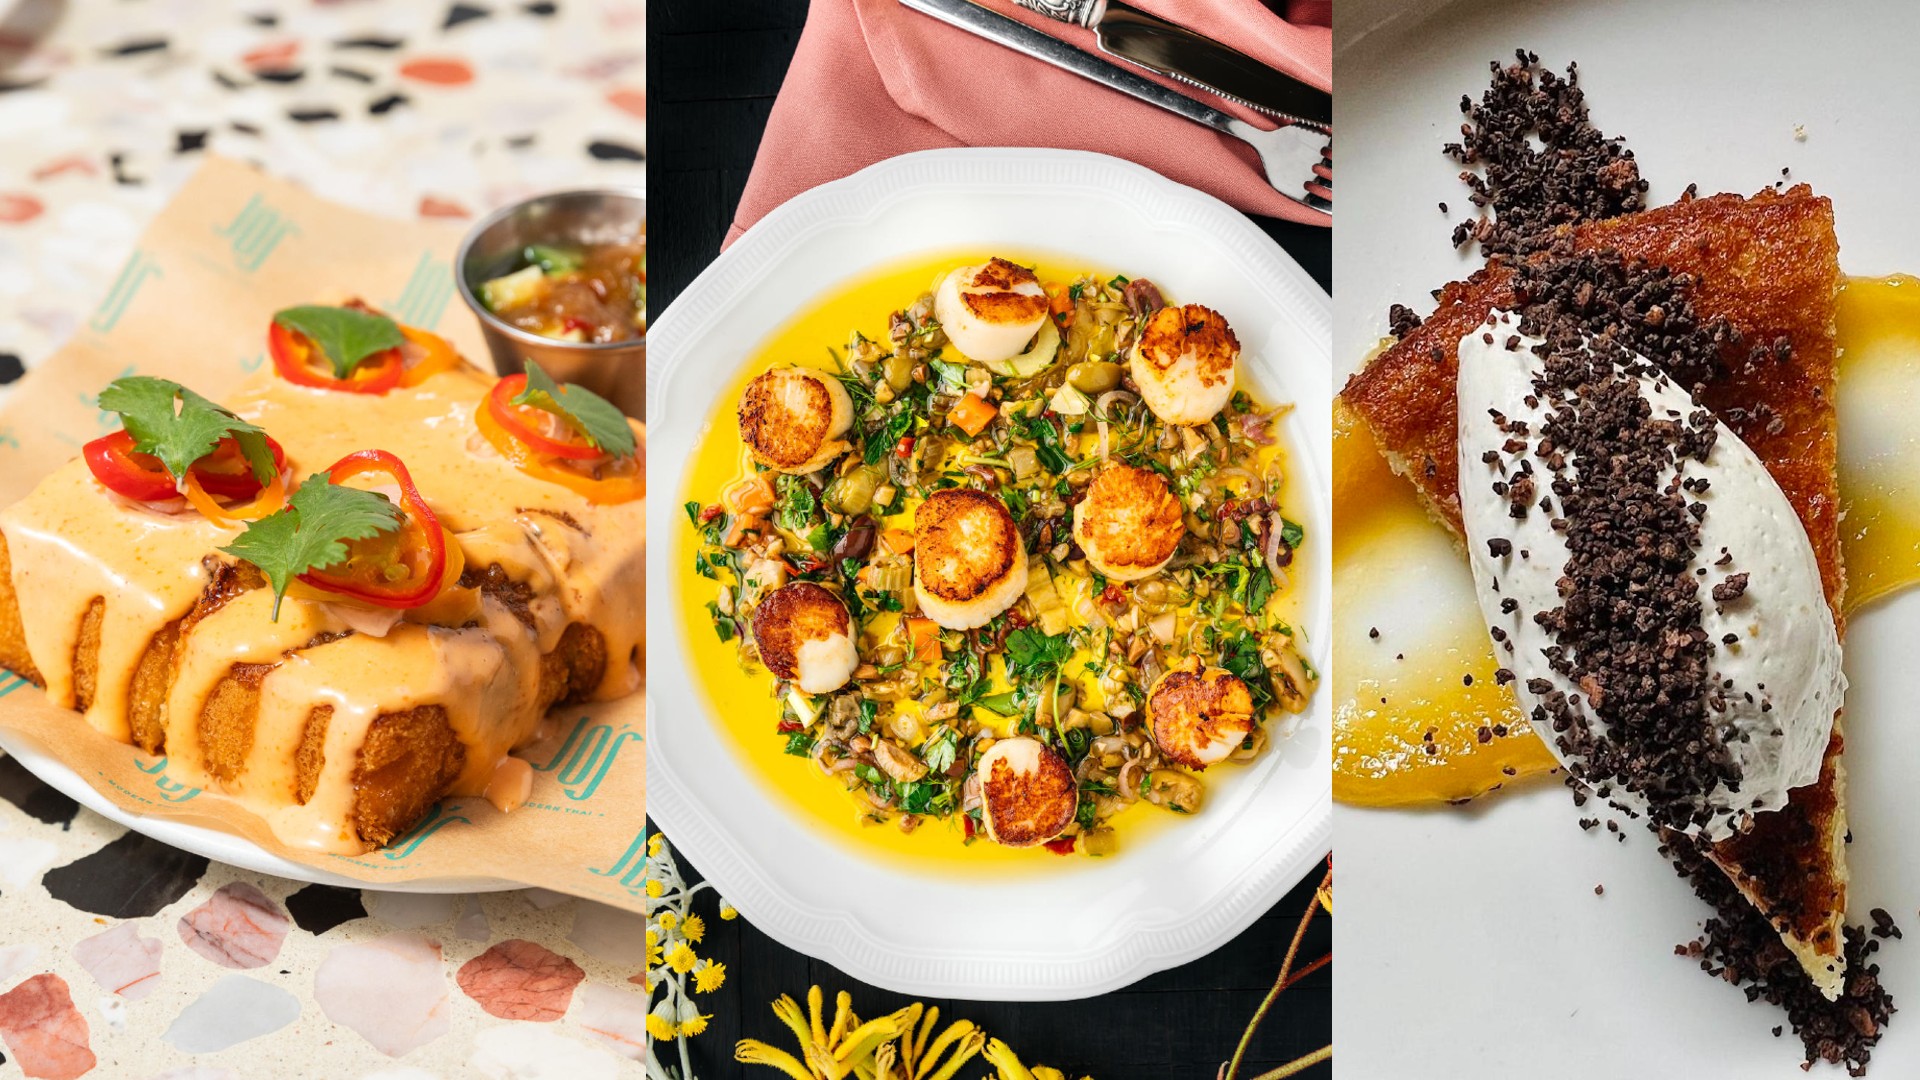 Collage of dishes by Oakland Michelin-rated restaurants